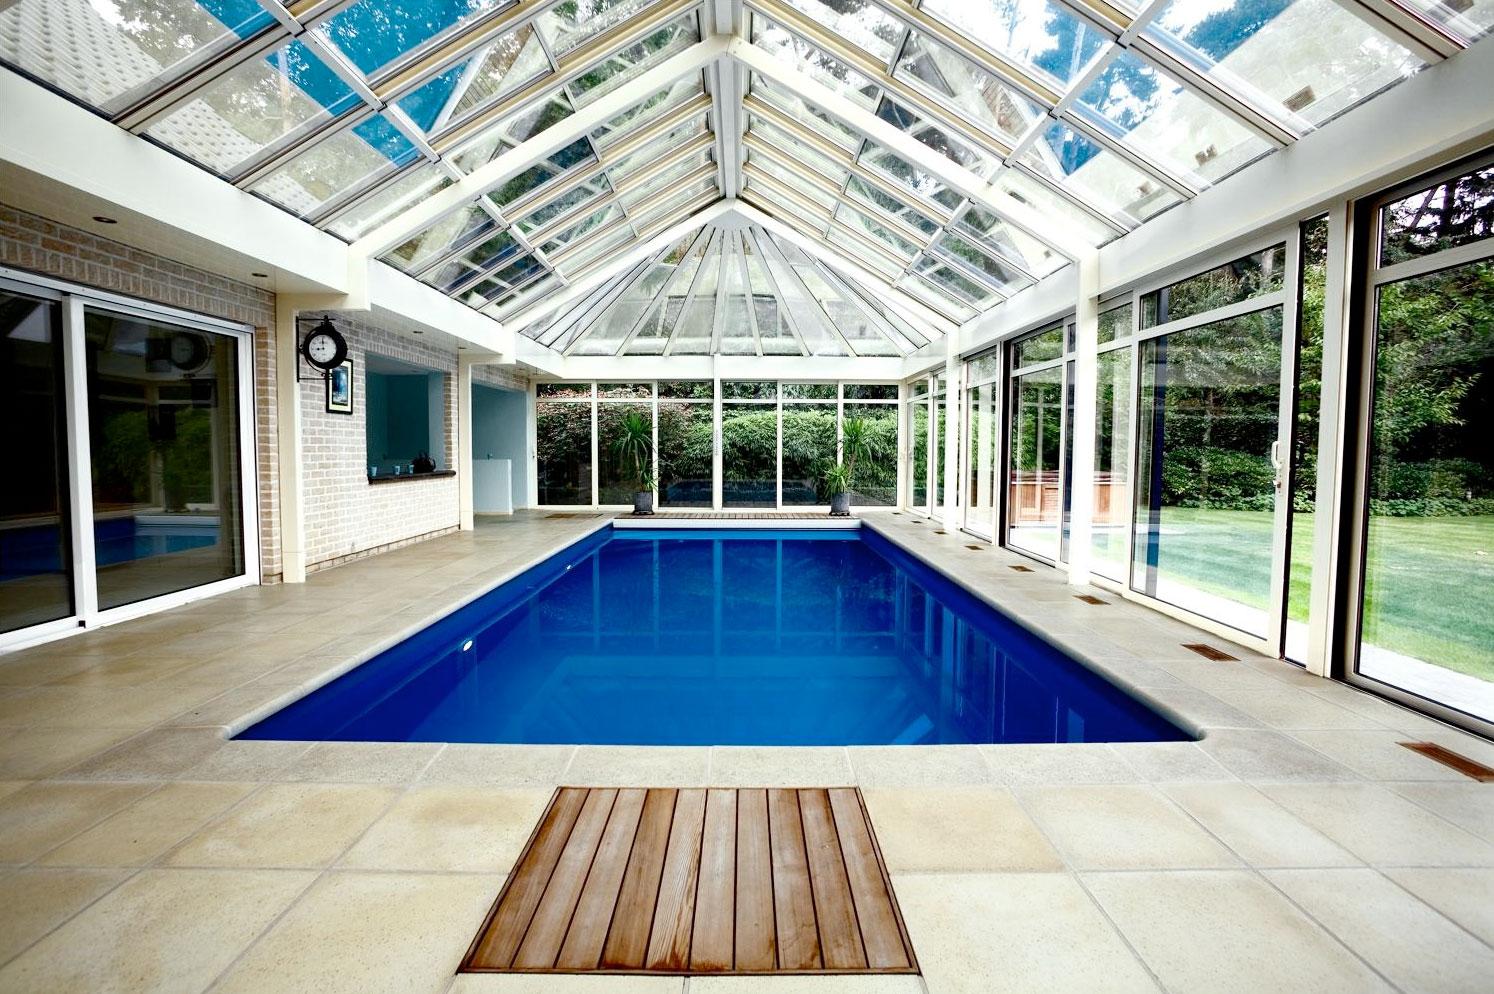 Creatice Indoor Swimming Pool Home for Small Space